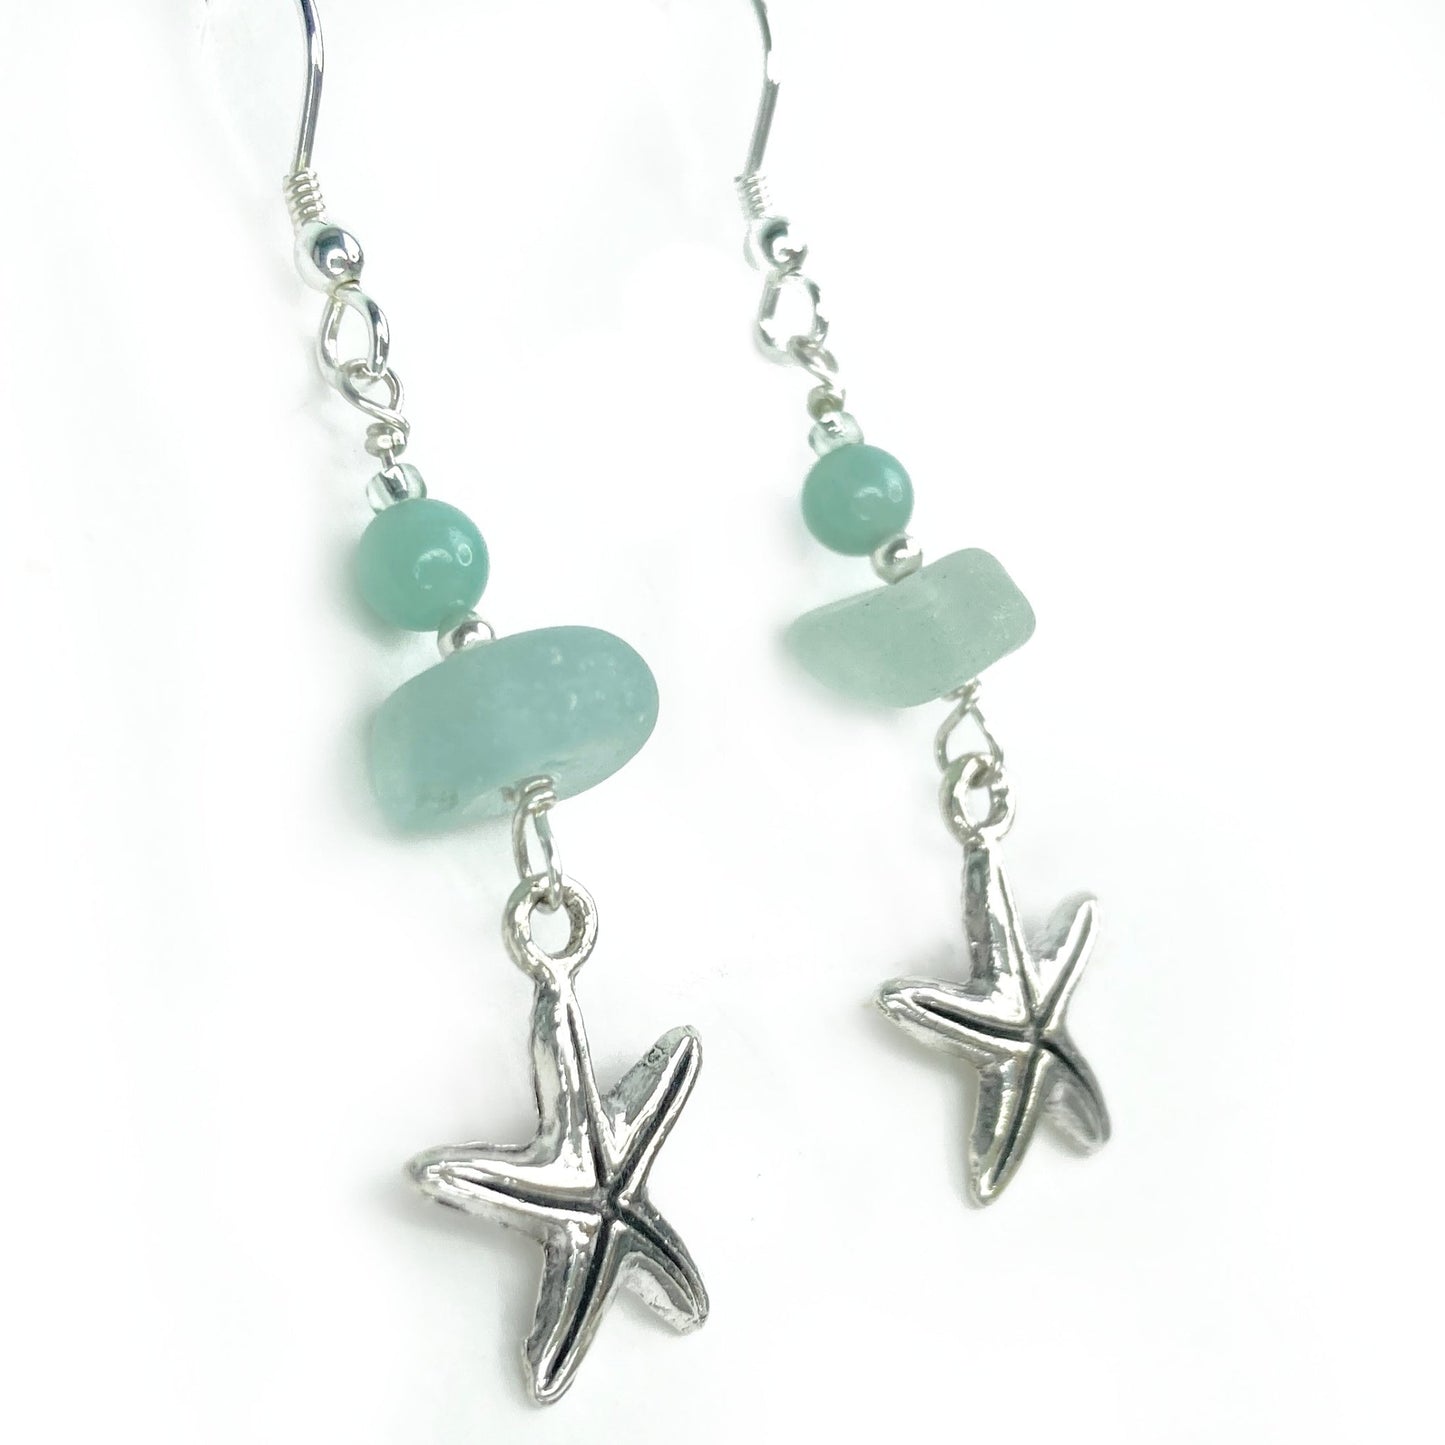 Starfish Earrings - Green Sea Glass & Silver Jewellery with Amazonite Crystal Beads - East Neuk Beach Crafts